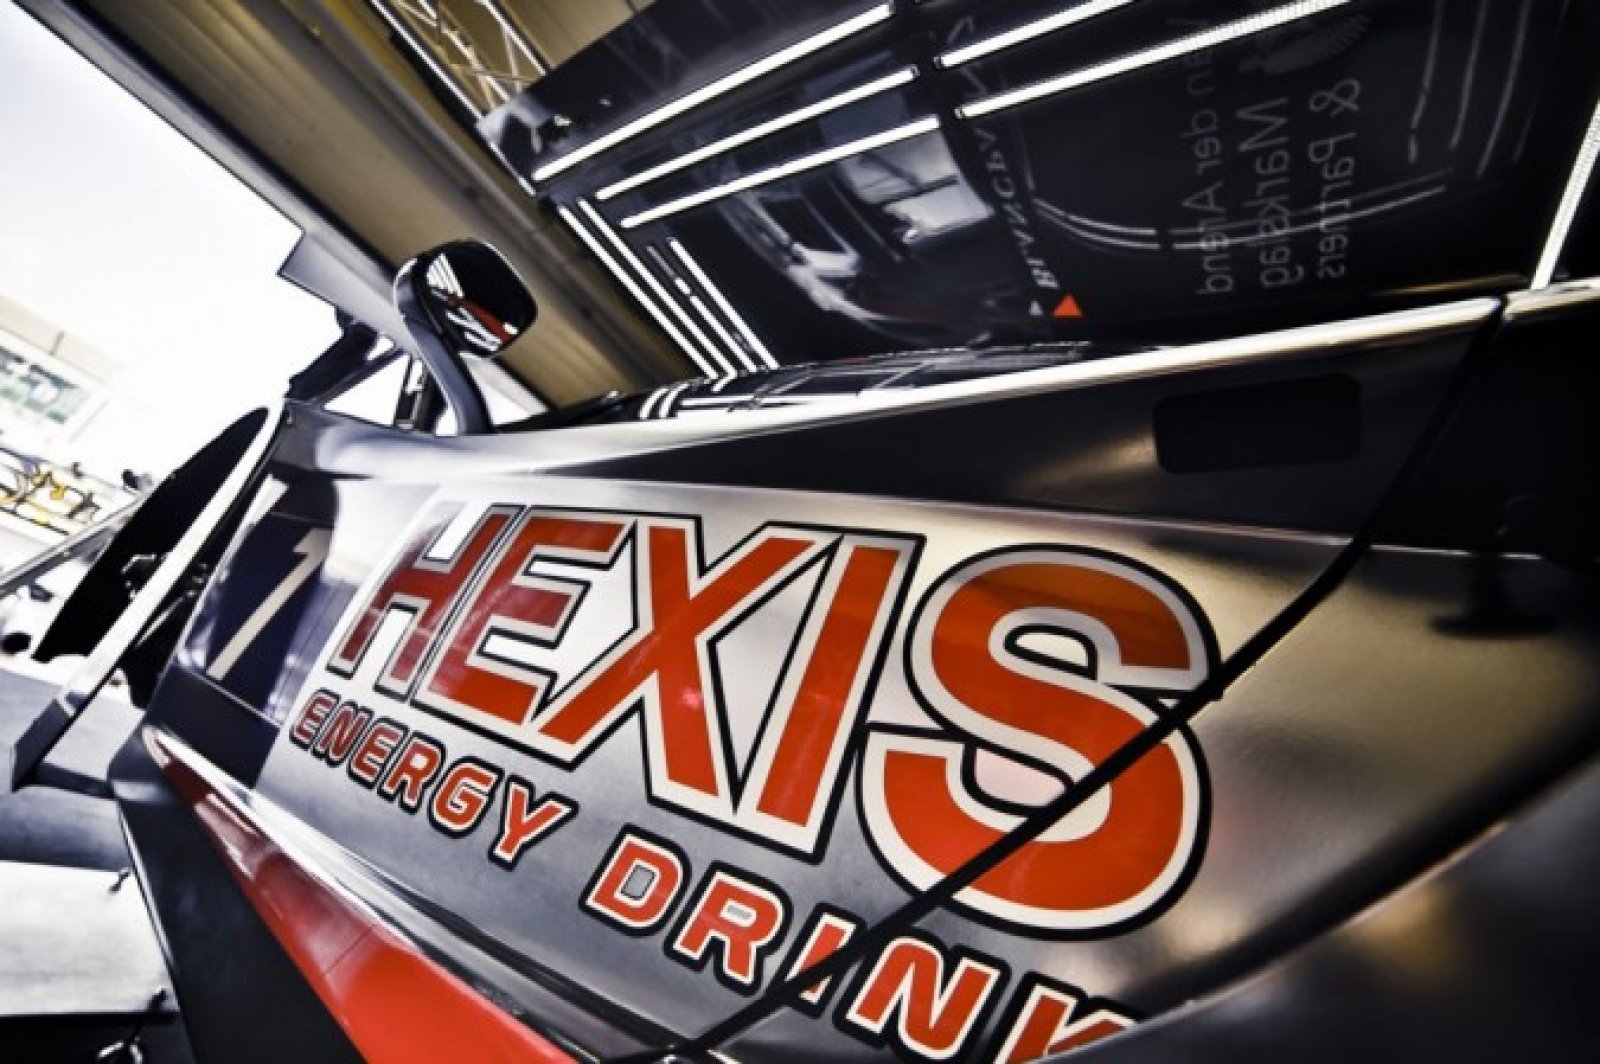 HEXIS Group and SRO Motorsports Group continue their partnership for the 2014 Blancpain GT Series